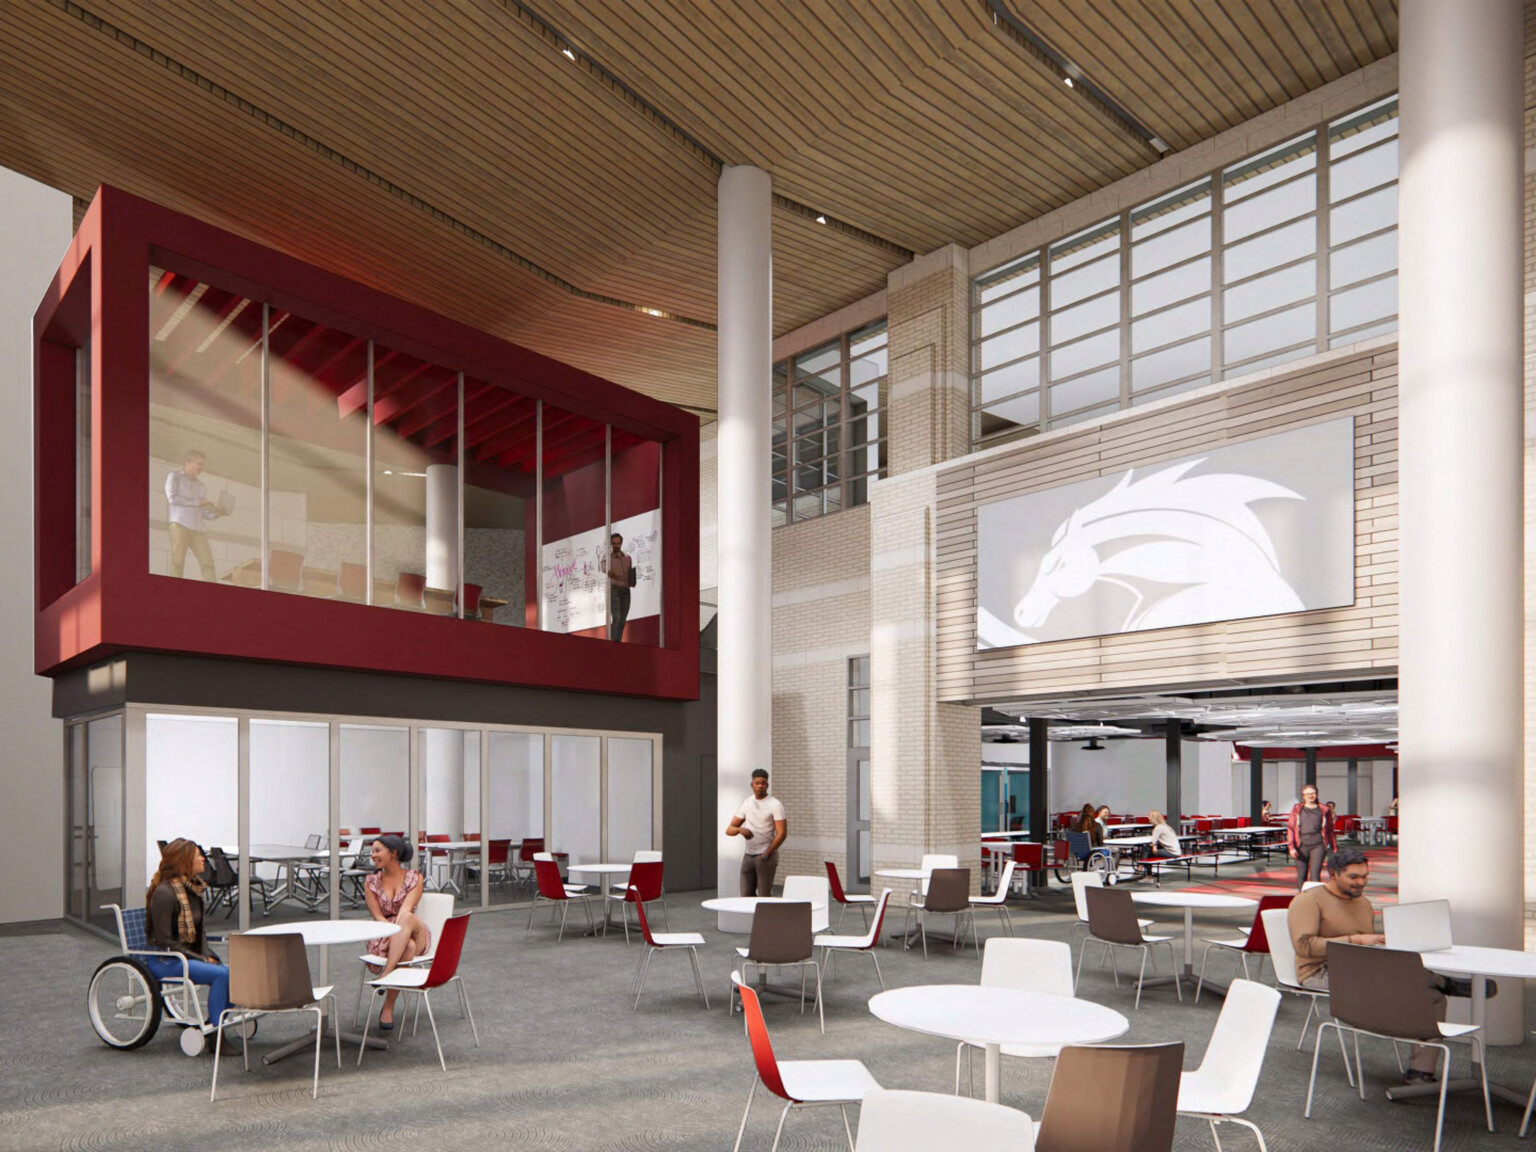 Interior of commons addition, double height space with large windows and red accent wall